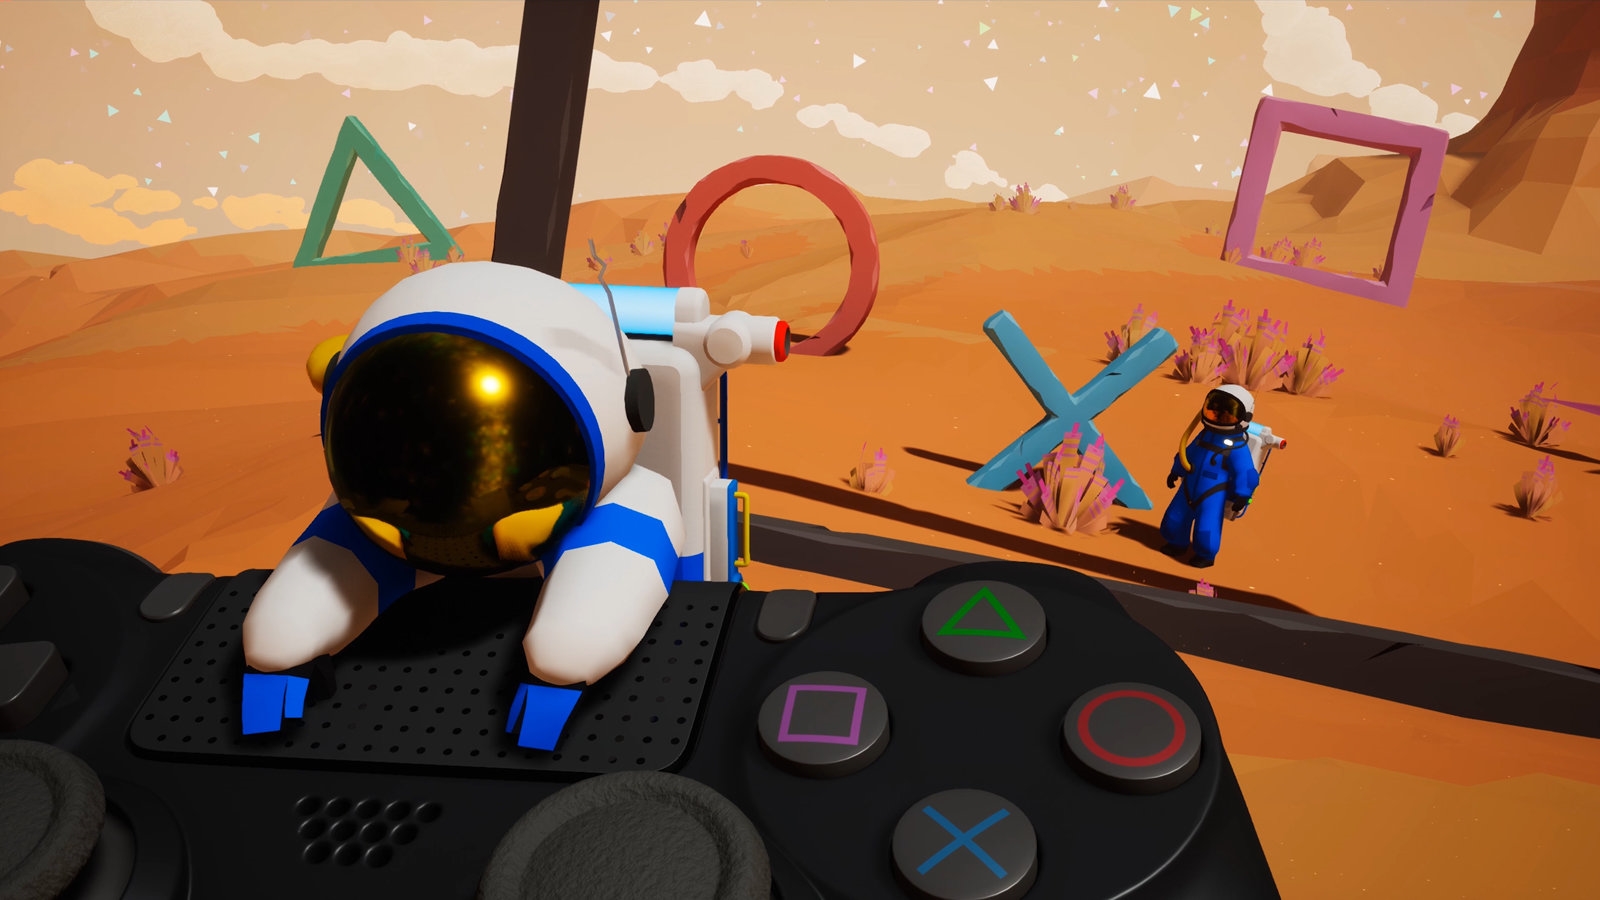 'Astroneer' brings planetary exploration to PS4 on November 15th | DeviceDaily.com